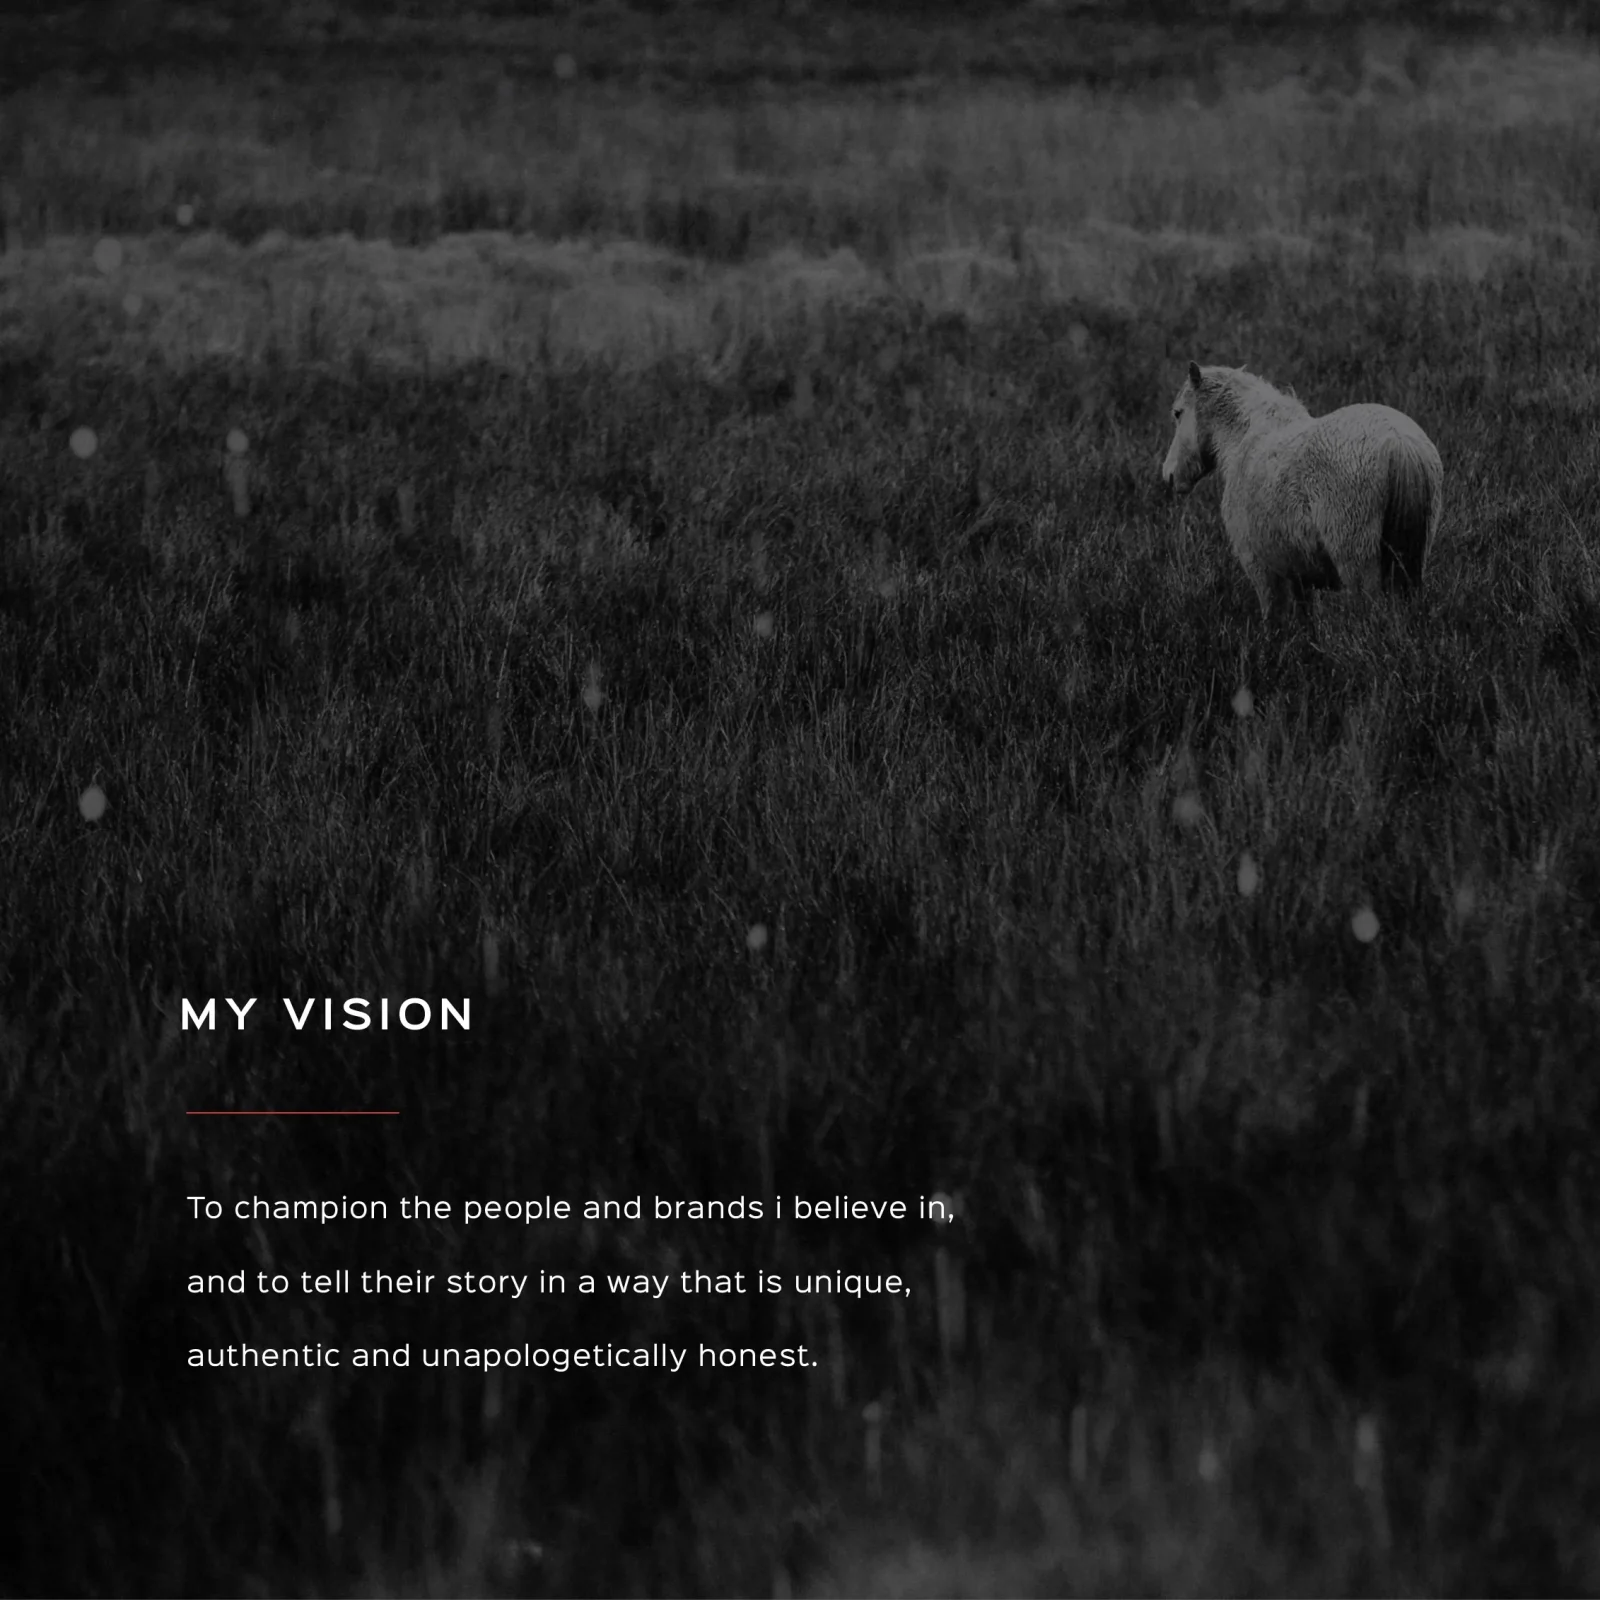 A lone white horse stands in a dark, grassy field with raindrops visible in the air. An overlay text in the lower right reads 